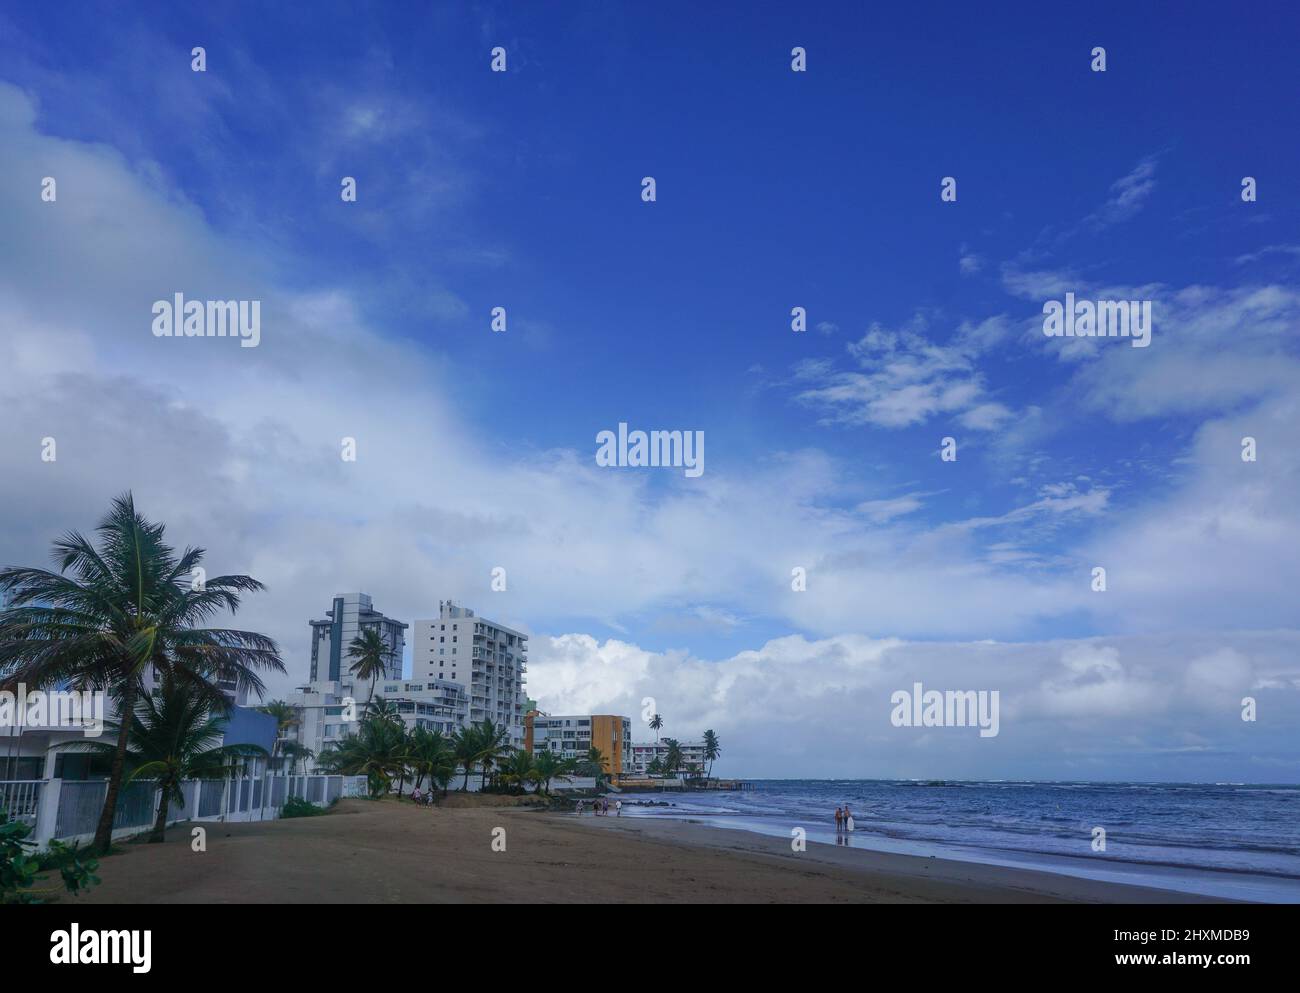 Isla Verde Beach, Puerto Rico, USA: Palm trees and hotels on a beach in Puerto Rico. Stock Photo